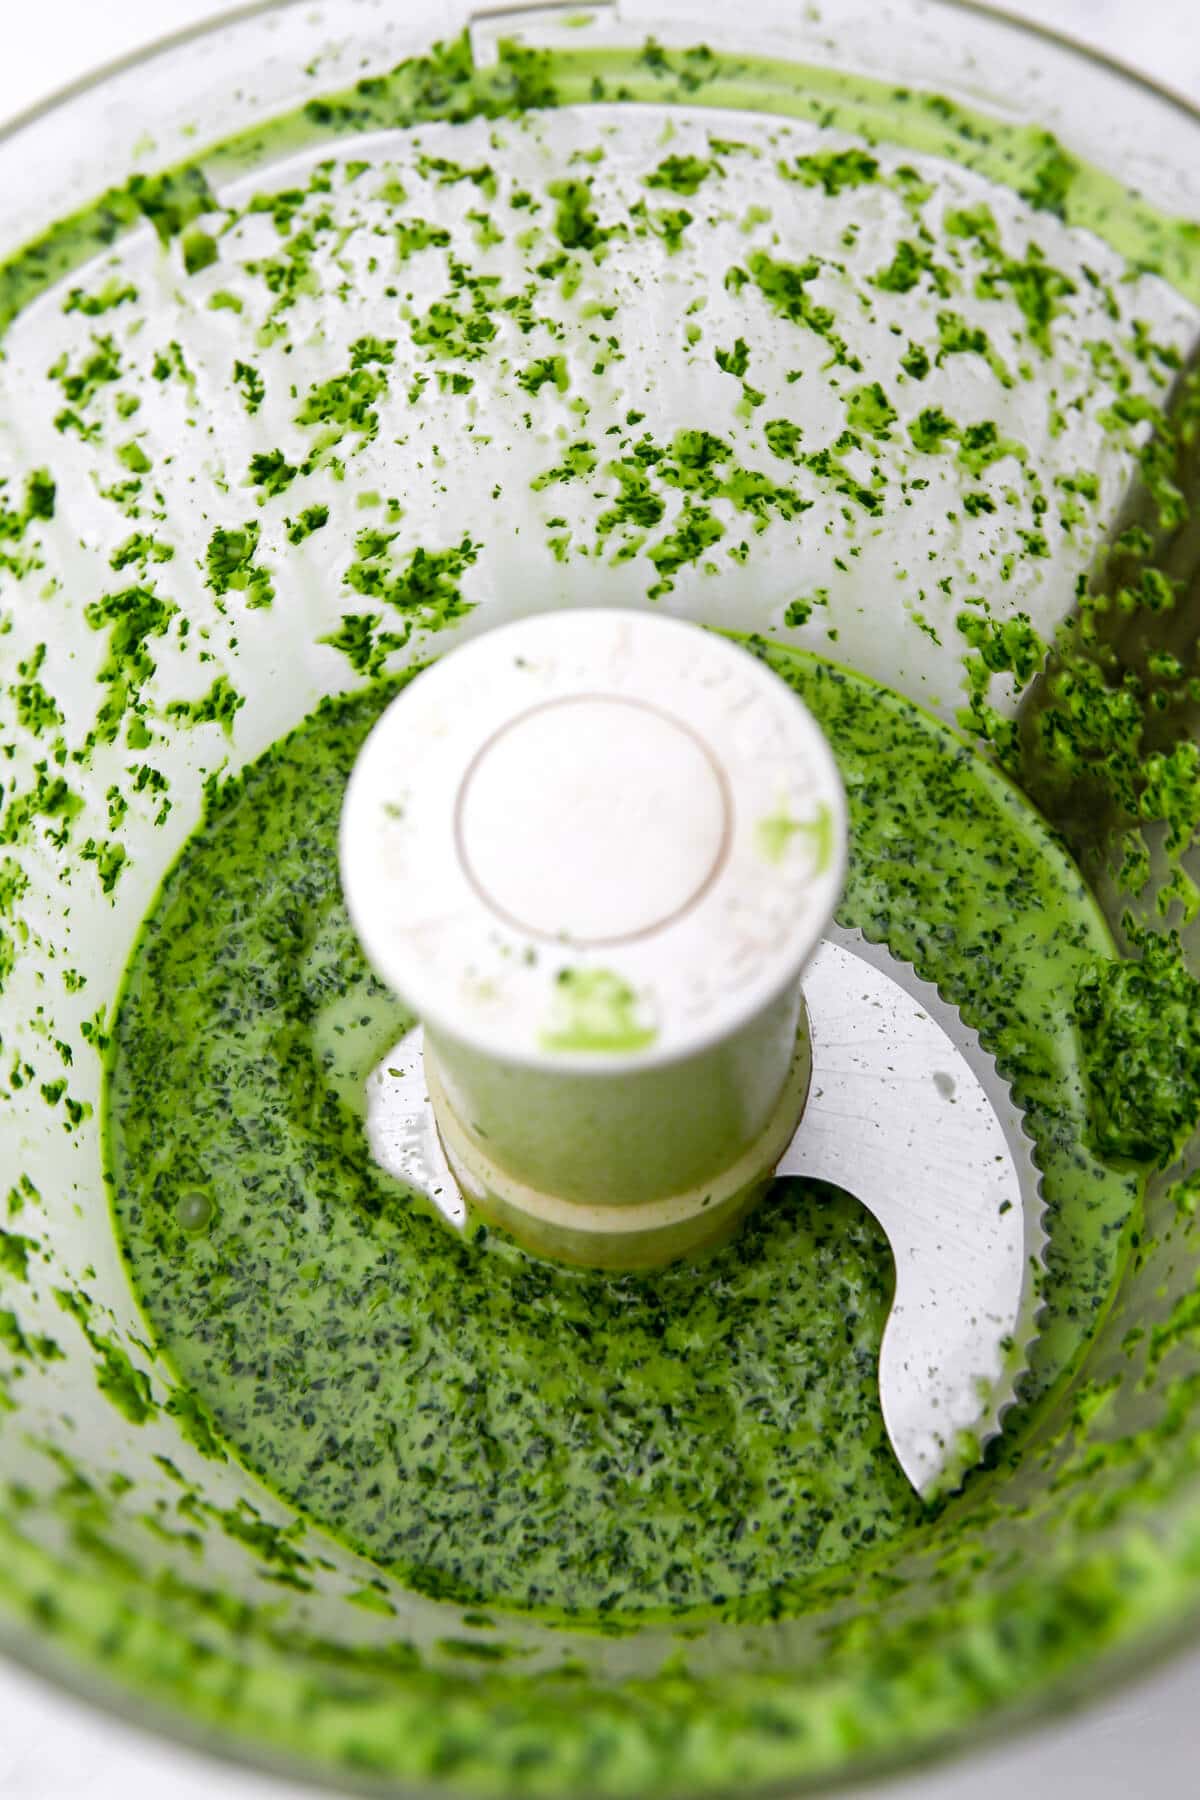 Cilantro garlic sauce blended in a food processor.